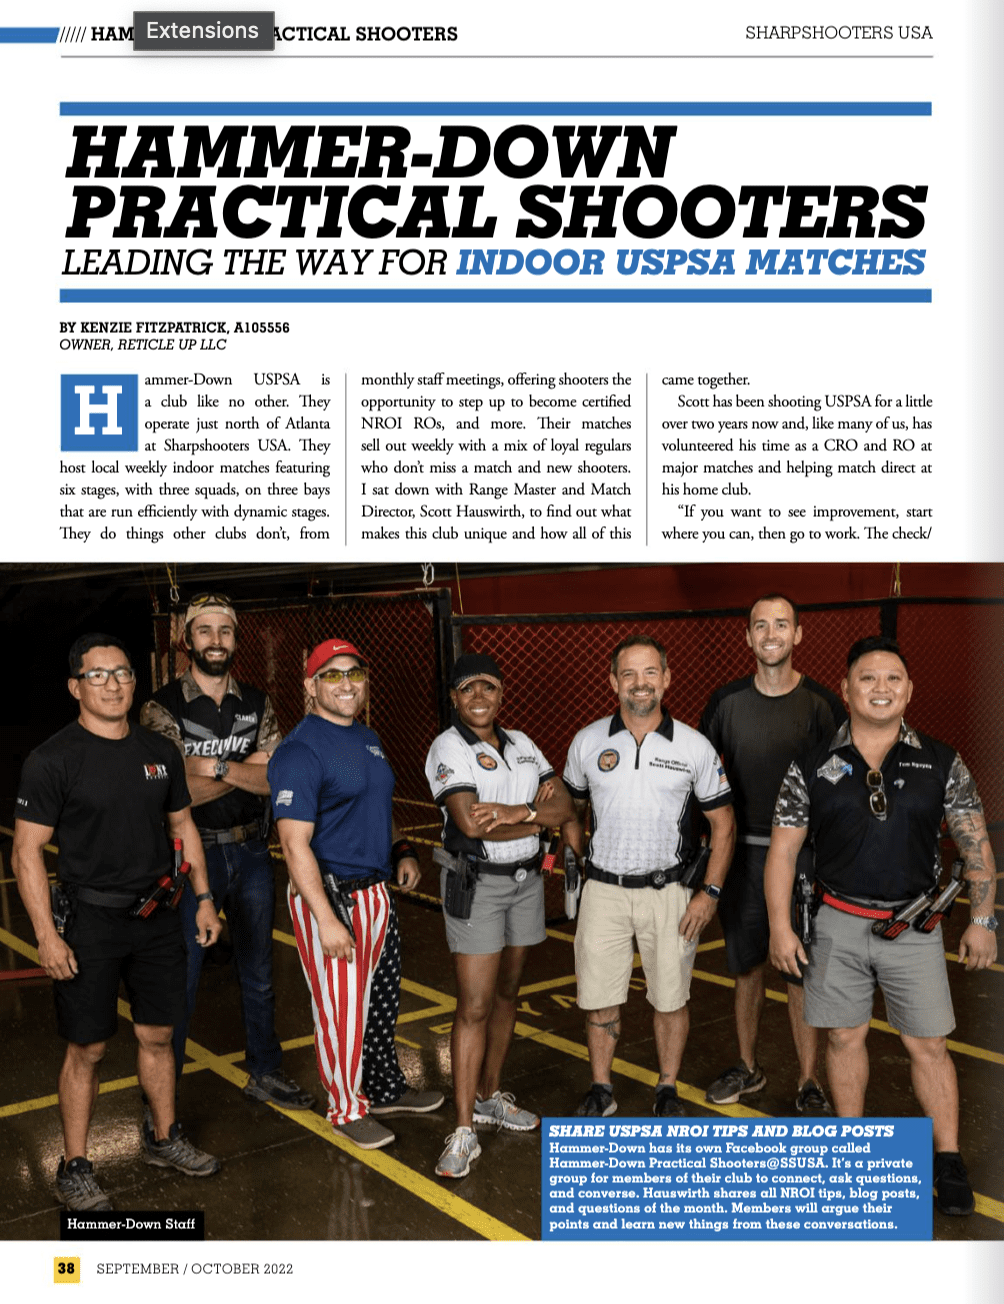 Hammer-Down Practical Shooters